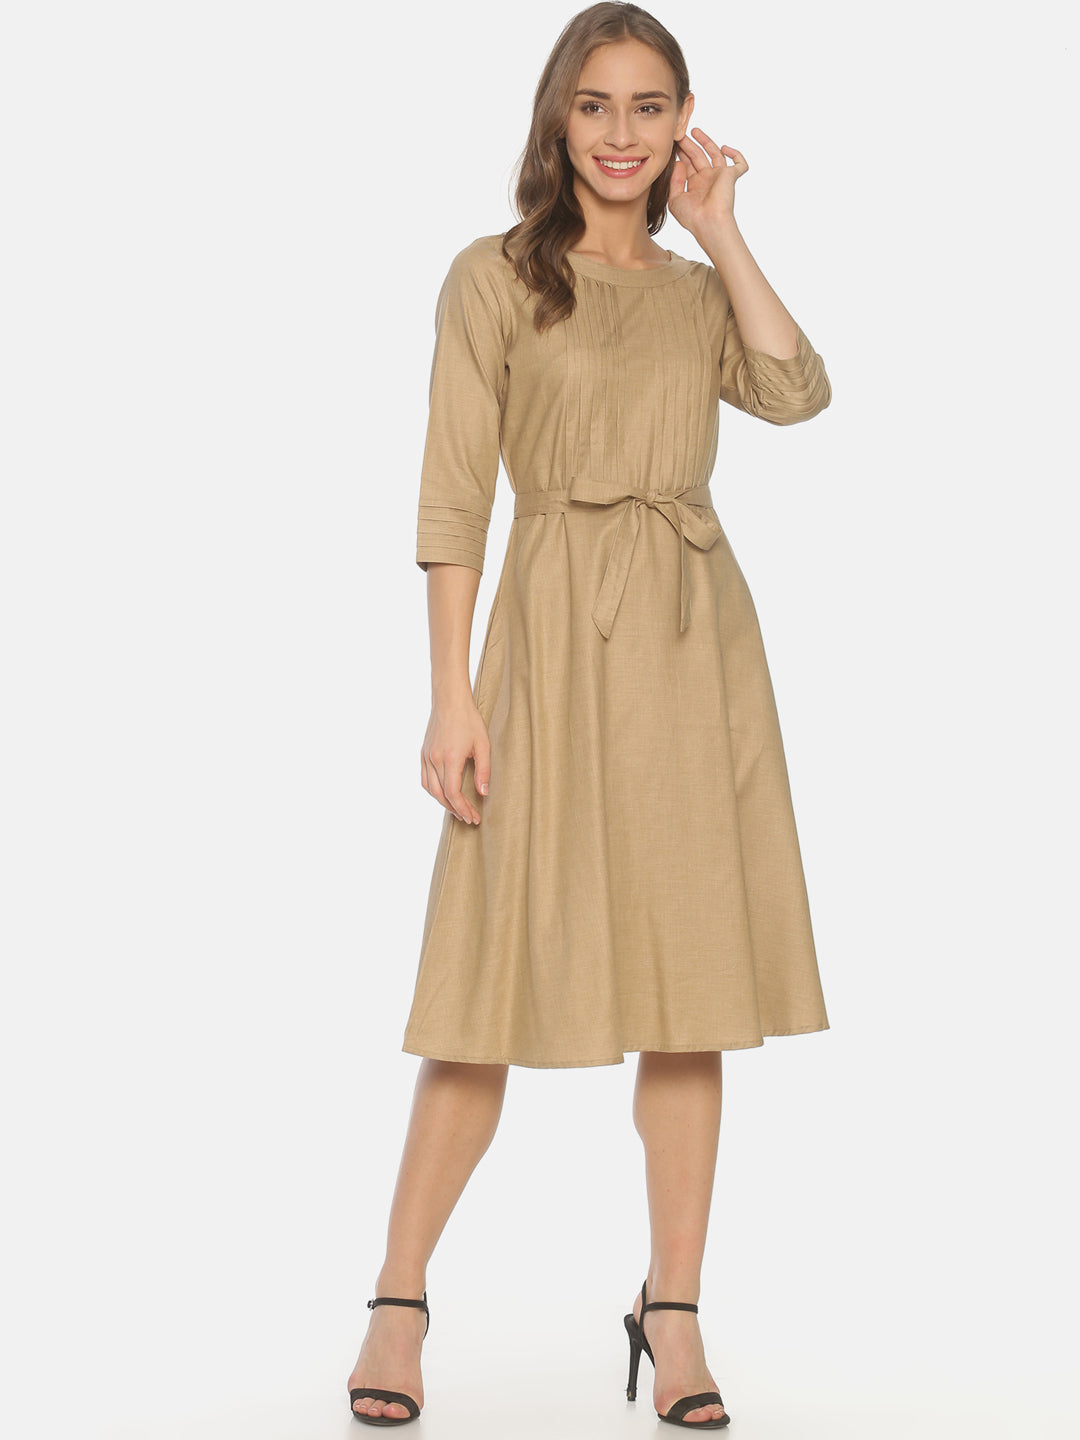 Daydream "Pure Cotton" Pleated Dress